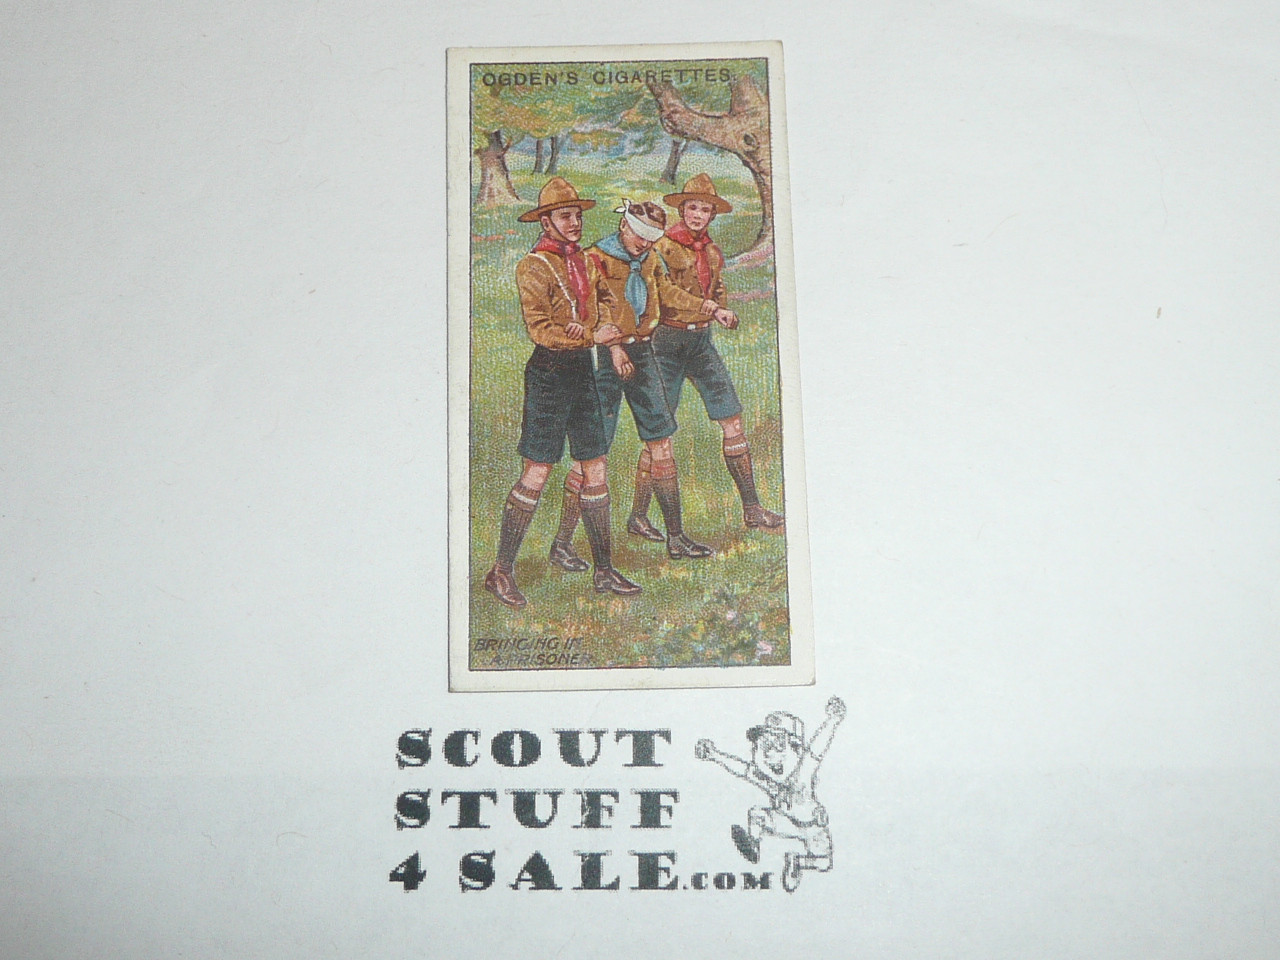 Ogden Tabacco Company Premium Card, First Boy Scout Series of 50 (Blue Backs), Card #33 Bringing a Prisoner Through the Camp Lines, 1911